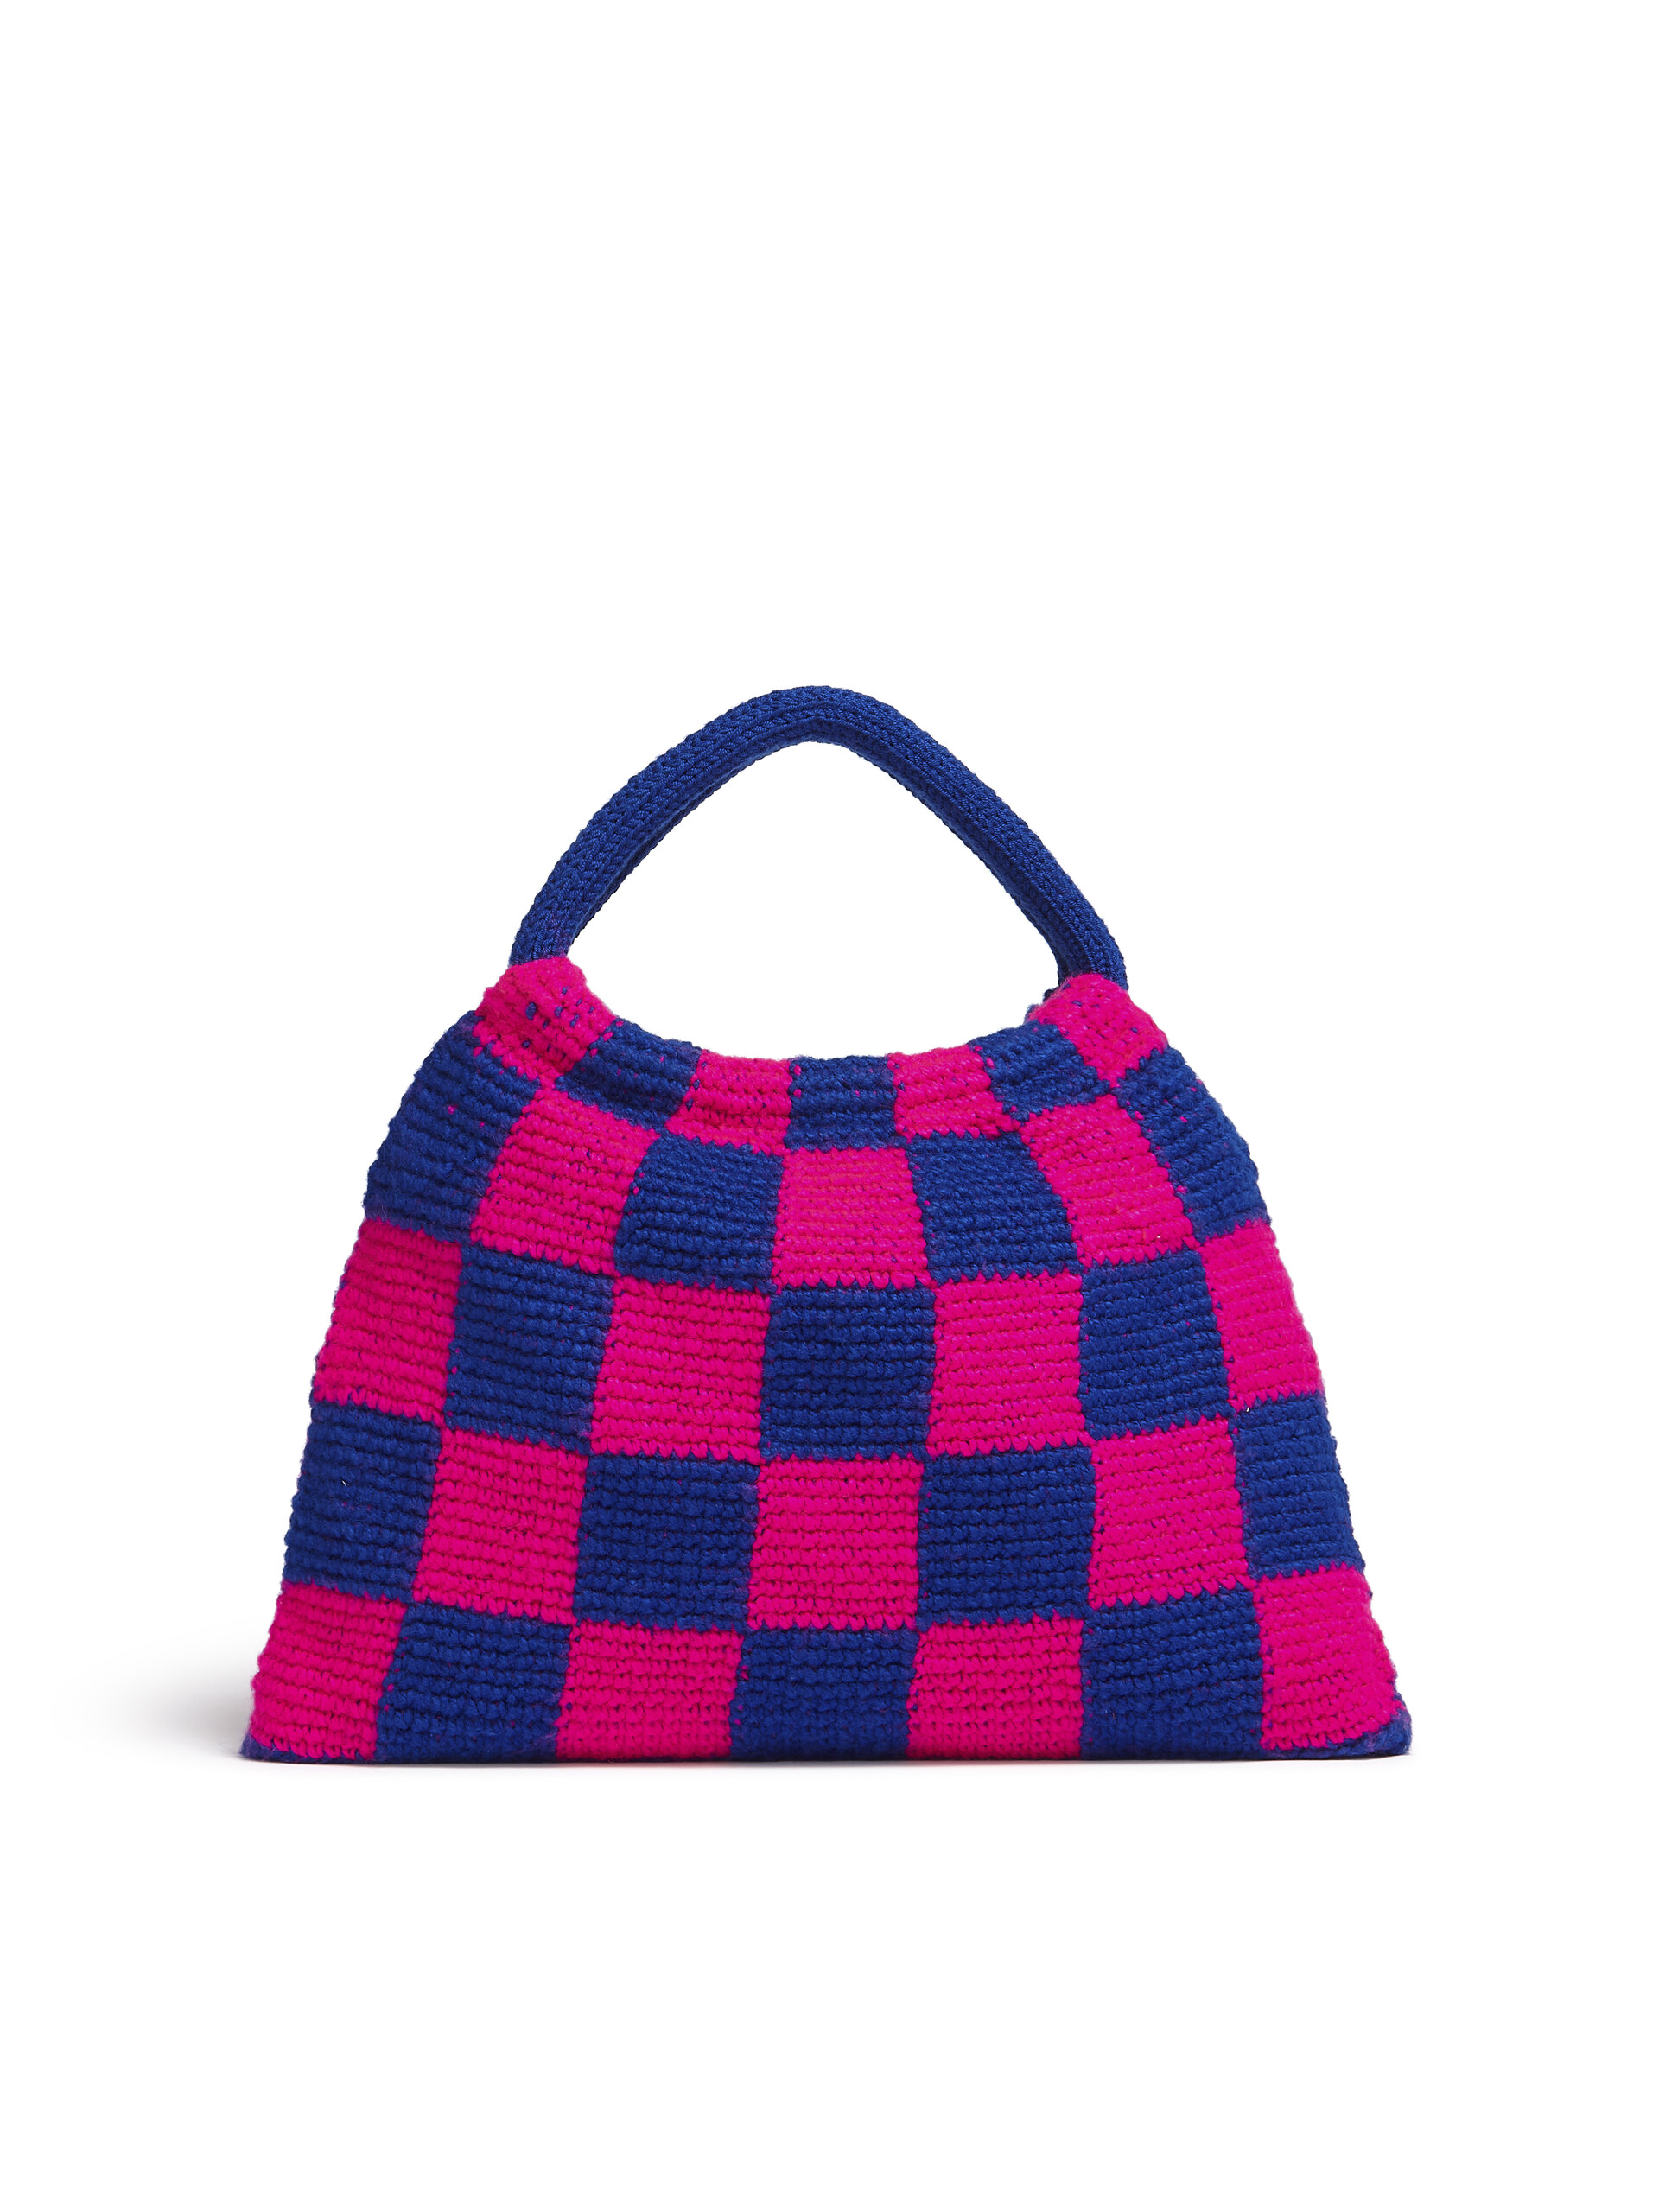 MARNI MARKET GRANNY bag in pink and blue crochet - Shopping Bags - Image 3